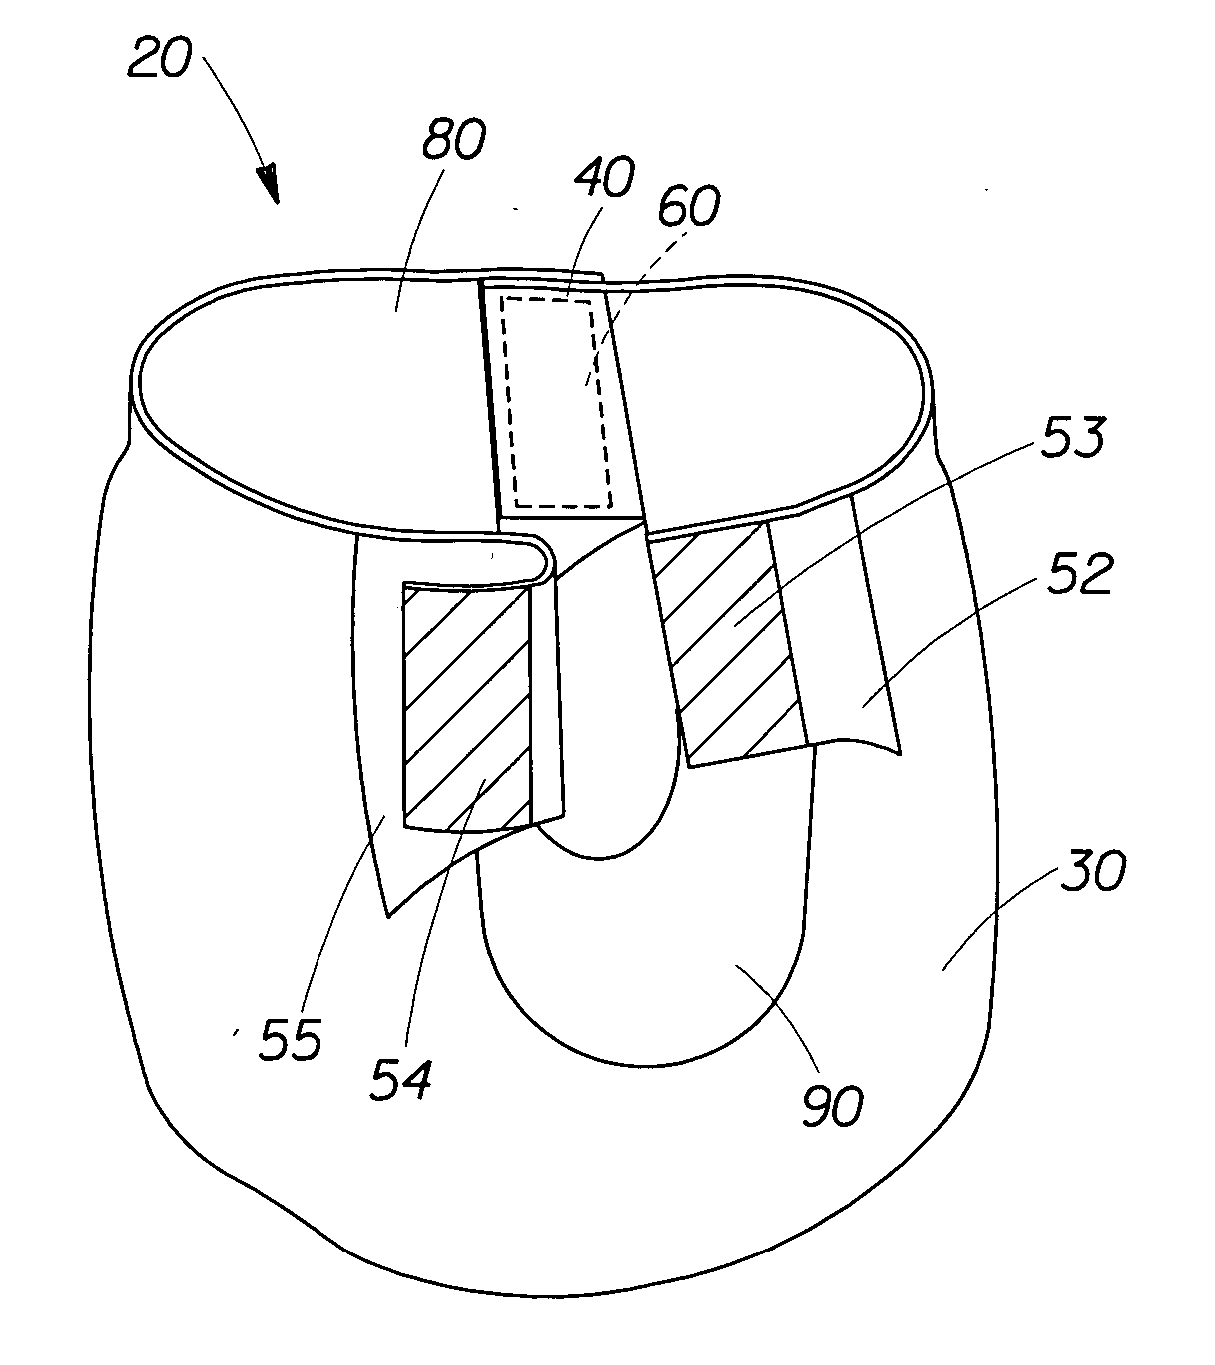 Pant-like disposable garment having improved fastener systems